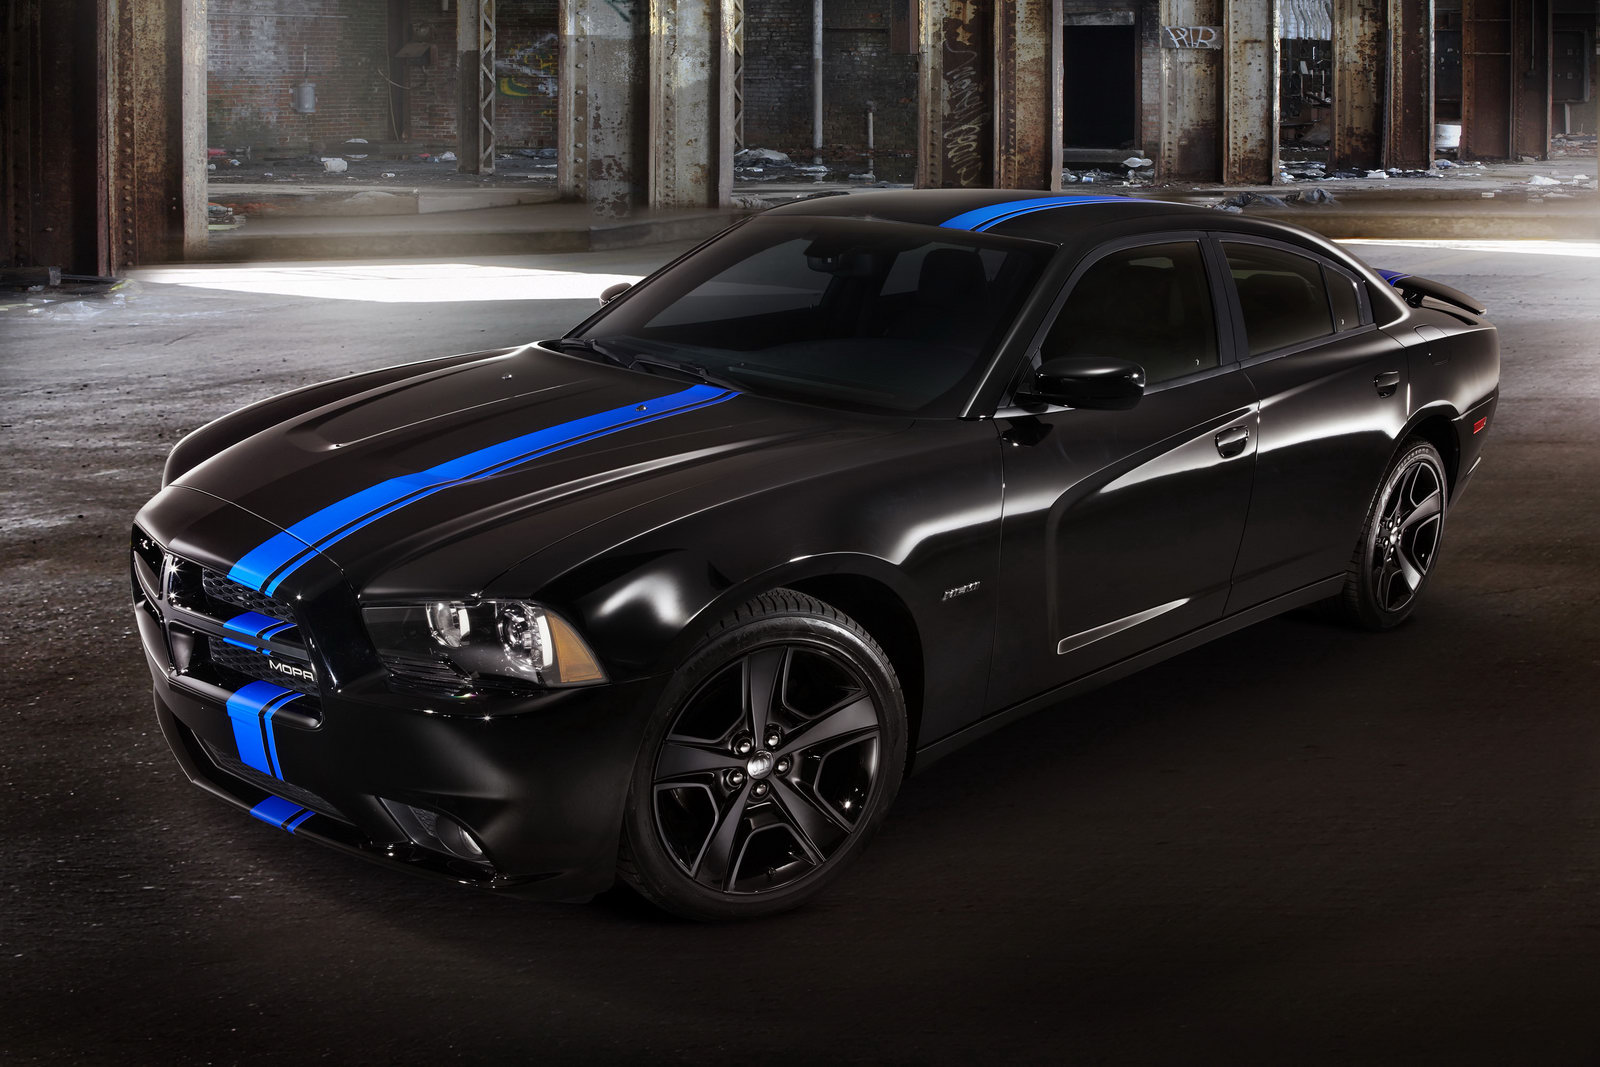 Dodge Charger Srt Hellcat Black Muscle Image And Wallpaper